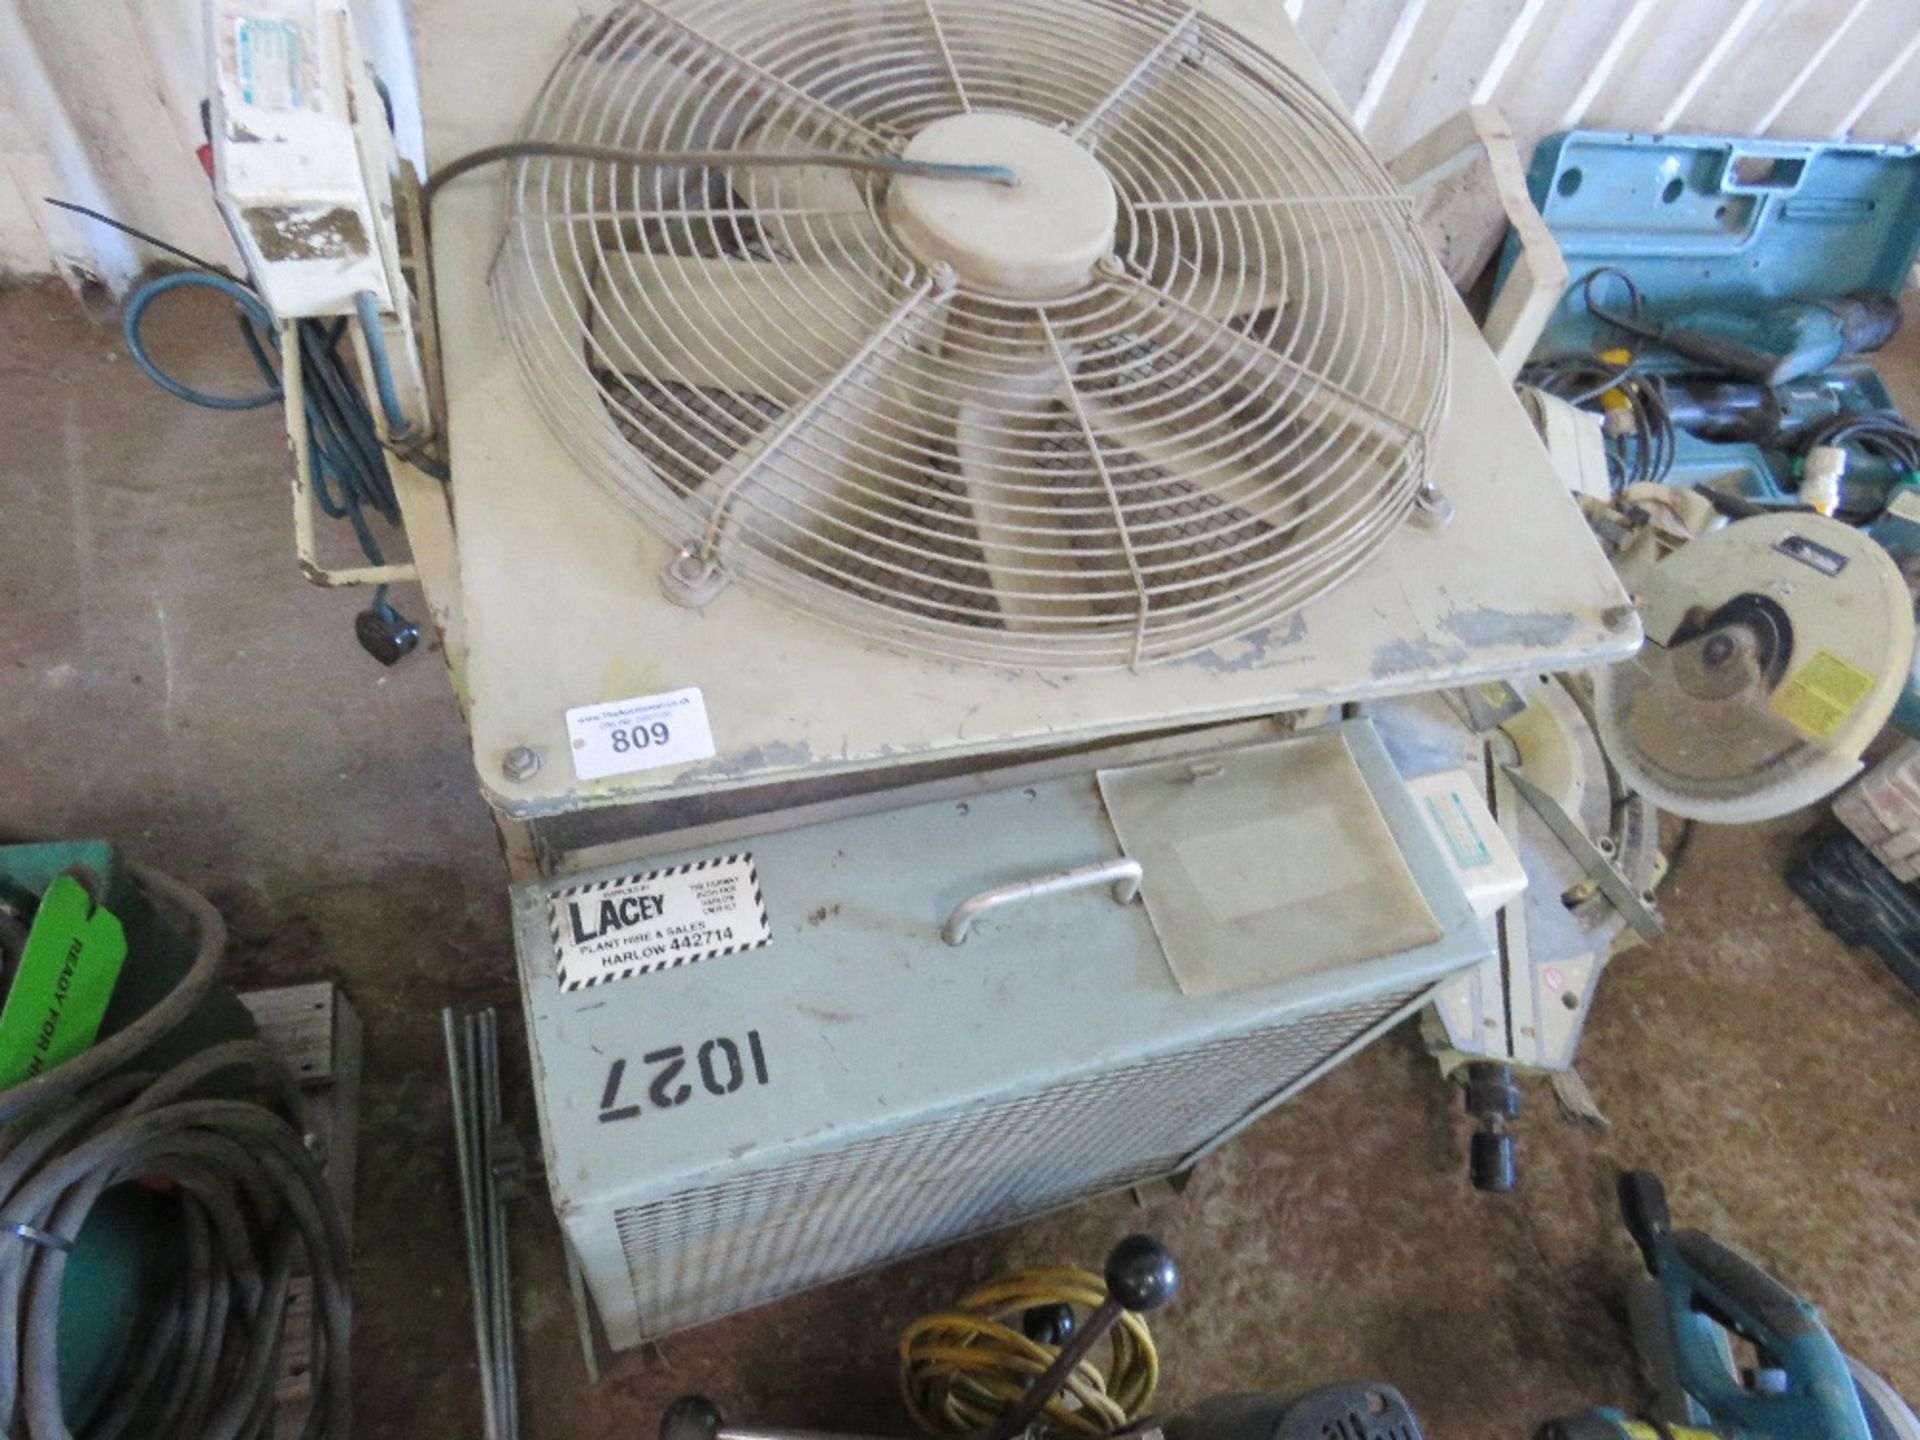 2 X FANS. DIRECT EX LOCAL COMPANY DUE TO DEPOT CLOSURE.